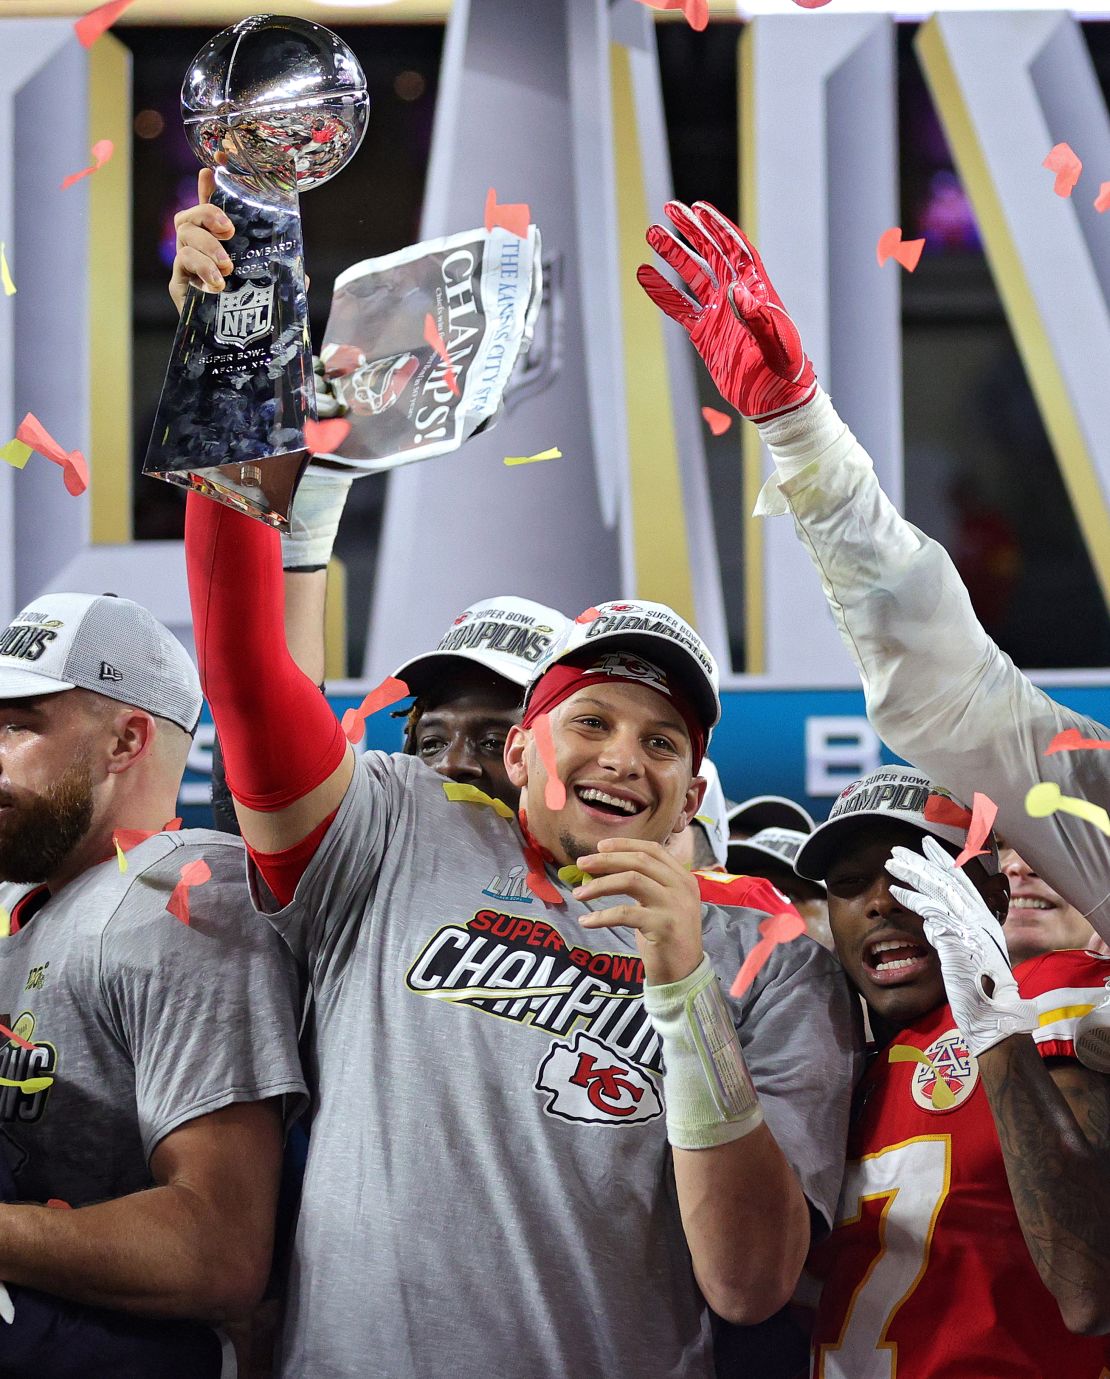 Patrick Mahomes of the Kansas City Chiefs raises the Vince Lombardi Trophy after defeating the San Francisco 49ers in Super Bowl LIV.